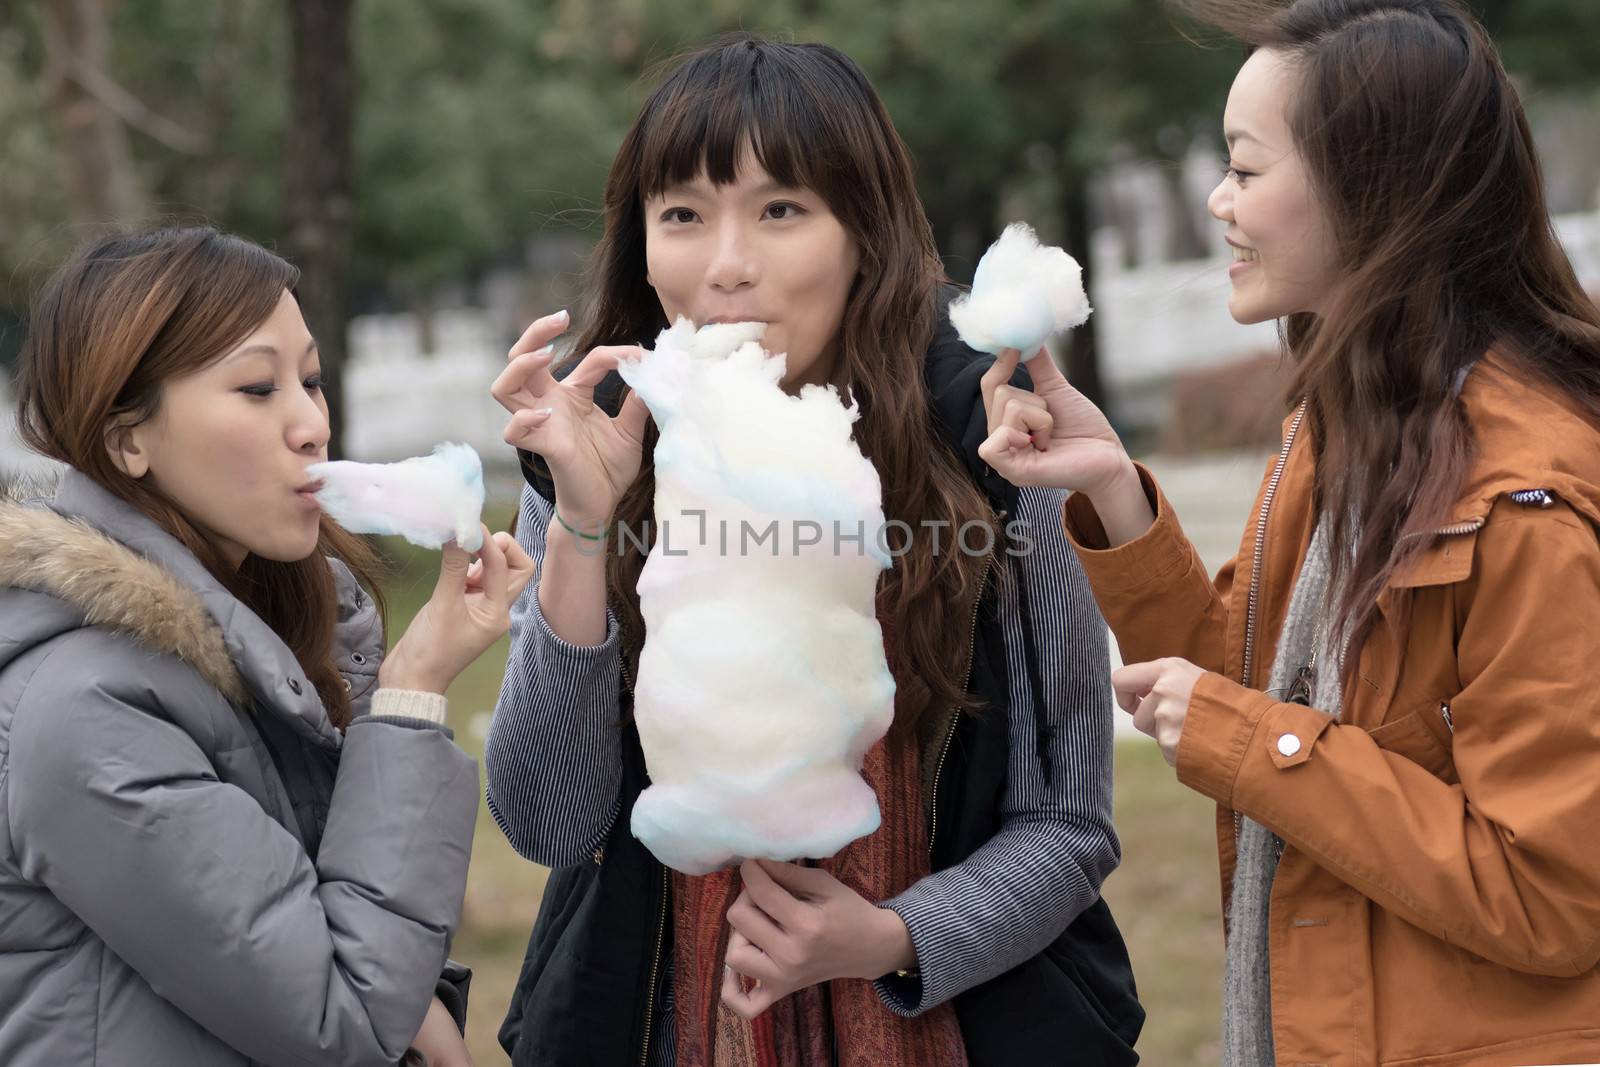 Happy young Asian woman eating cotton candy with her friends in outdoor.